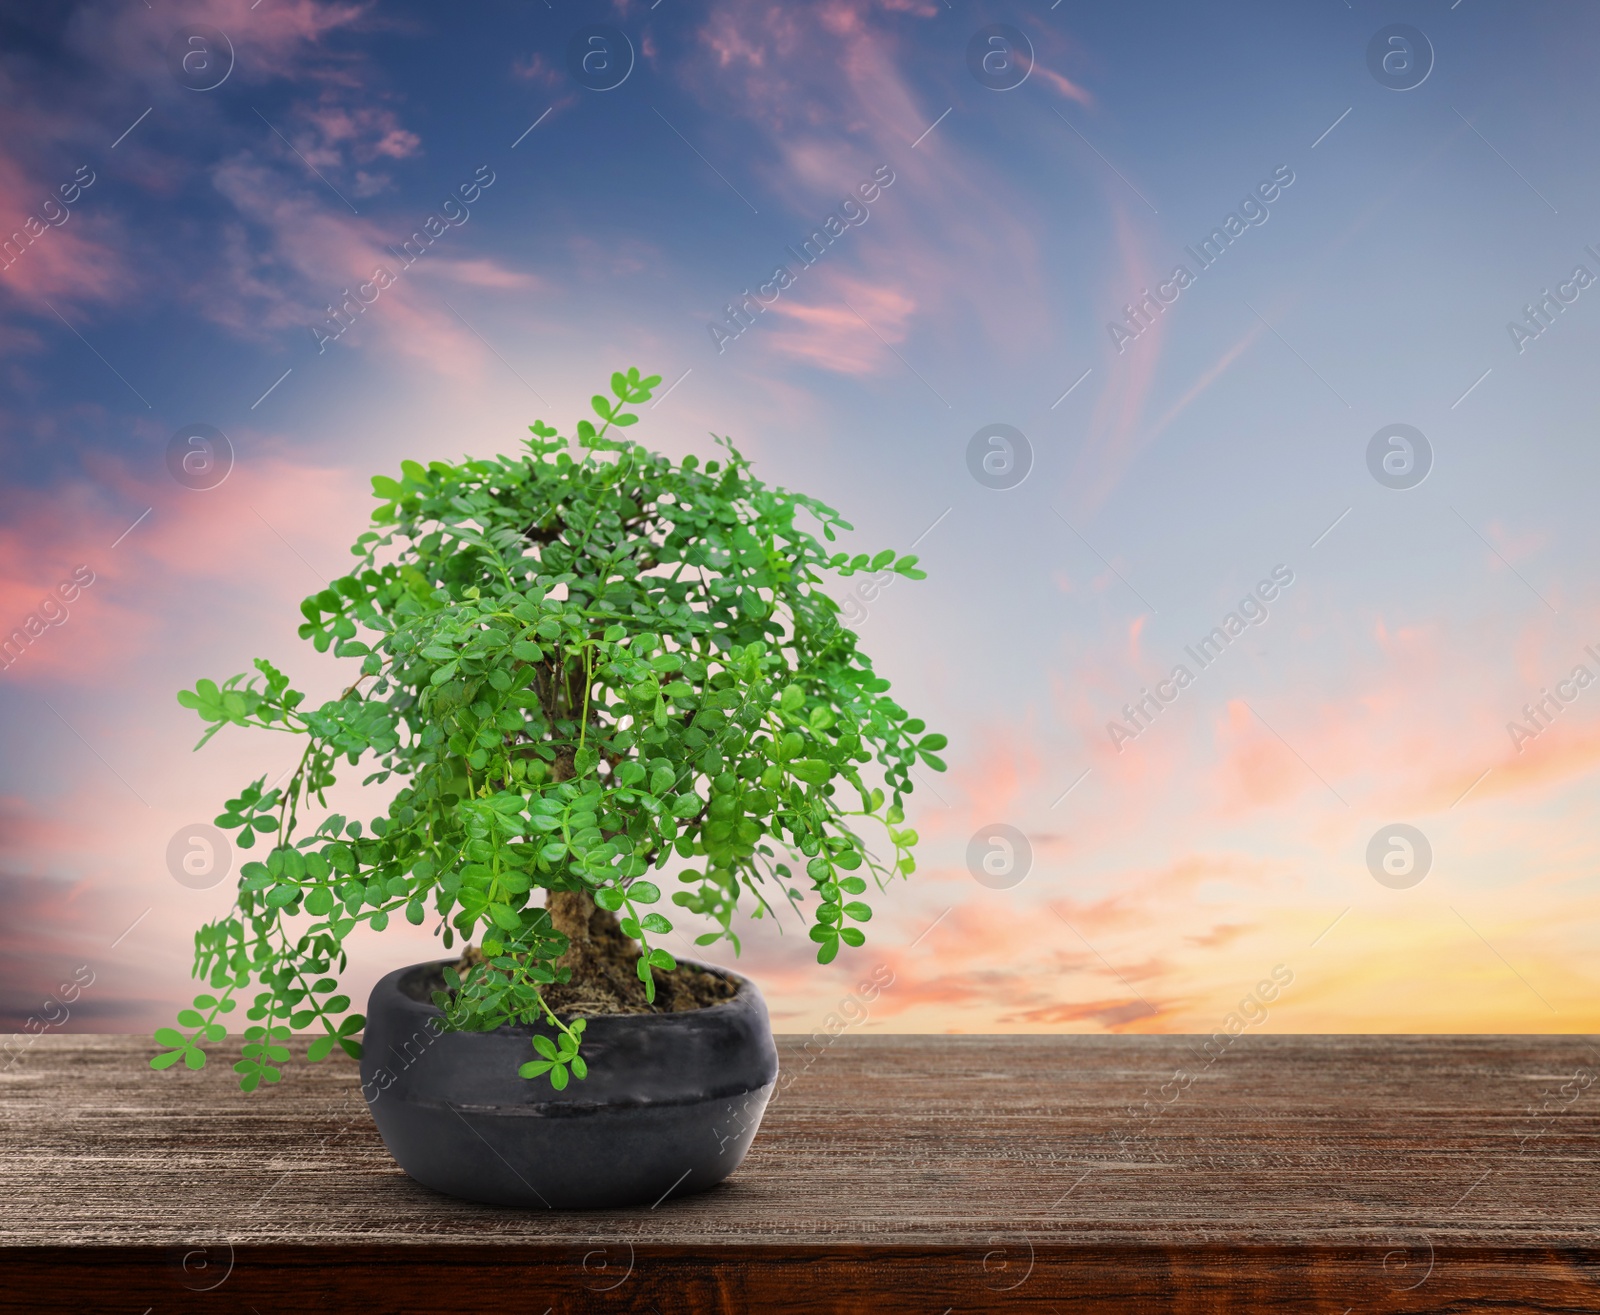 Image of Beautiful bonsai tree in pot on wooden table outdoors at sunset, space for text